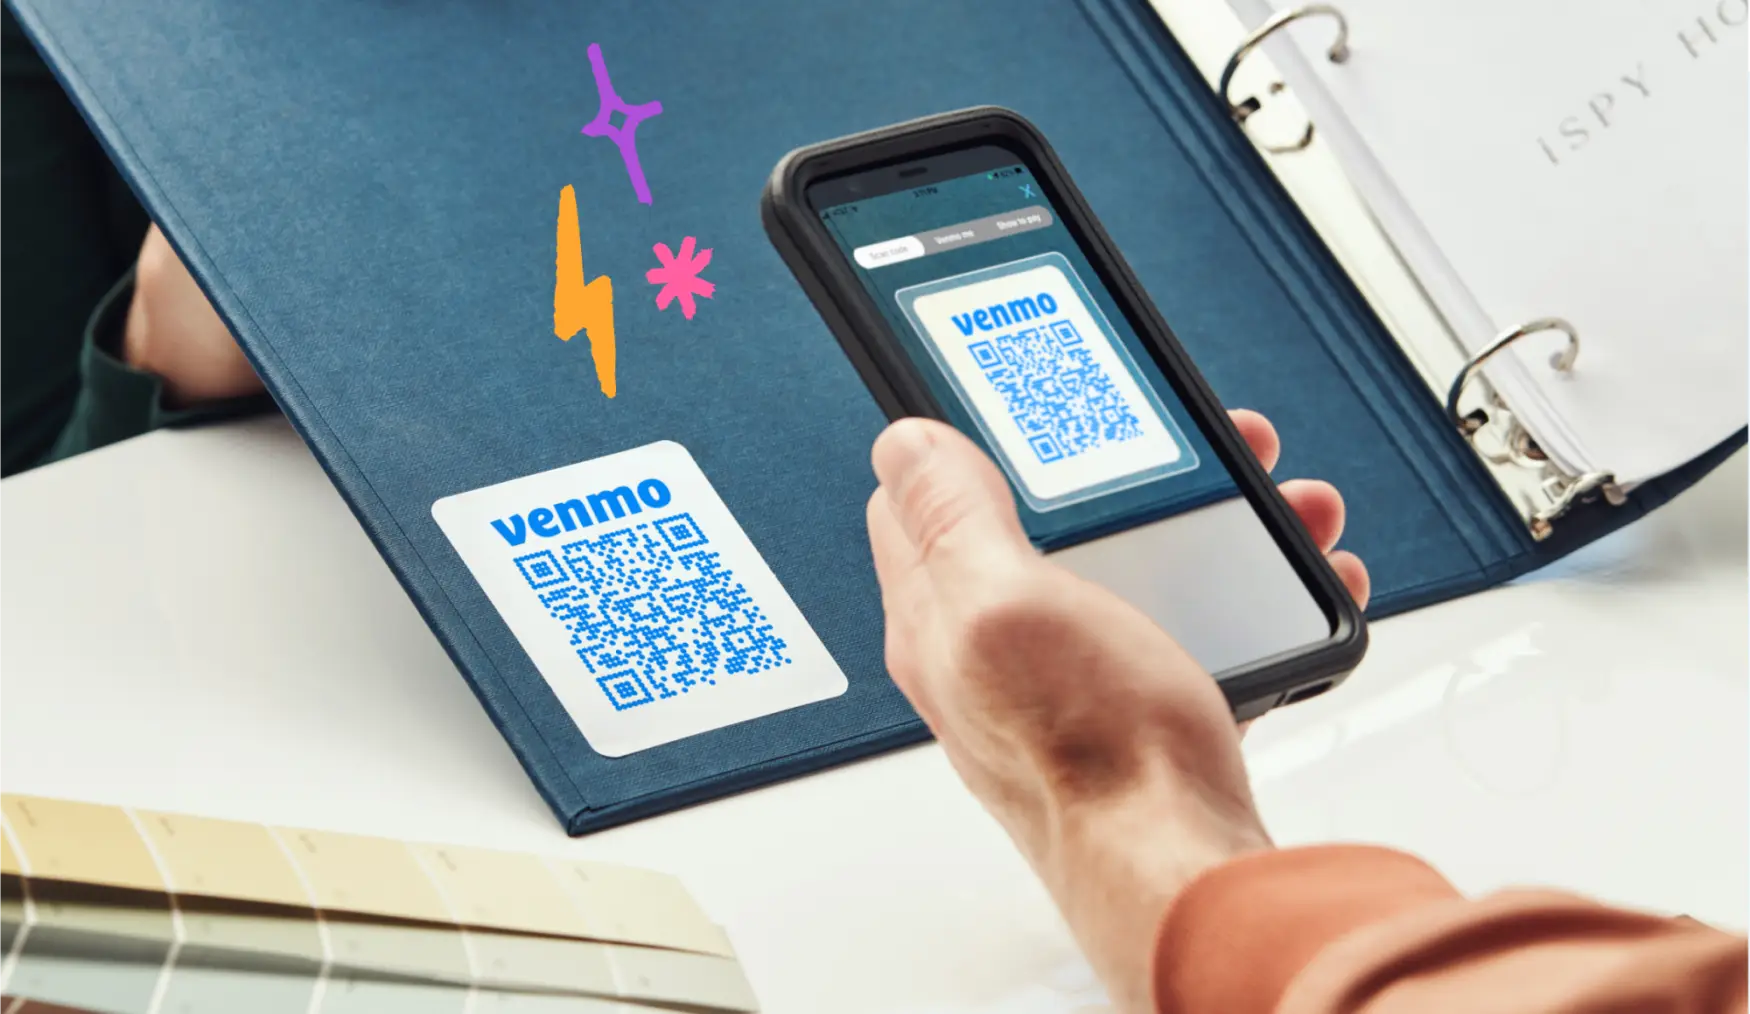 How to Use the Venmo QR Code to Easily Transfer Money from Your Smartphone